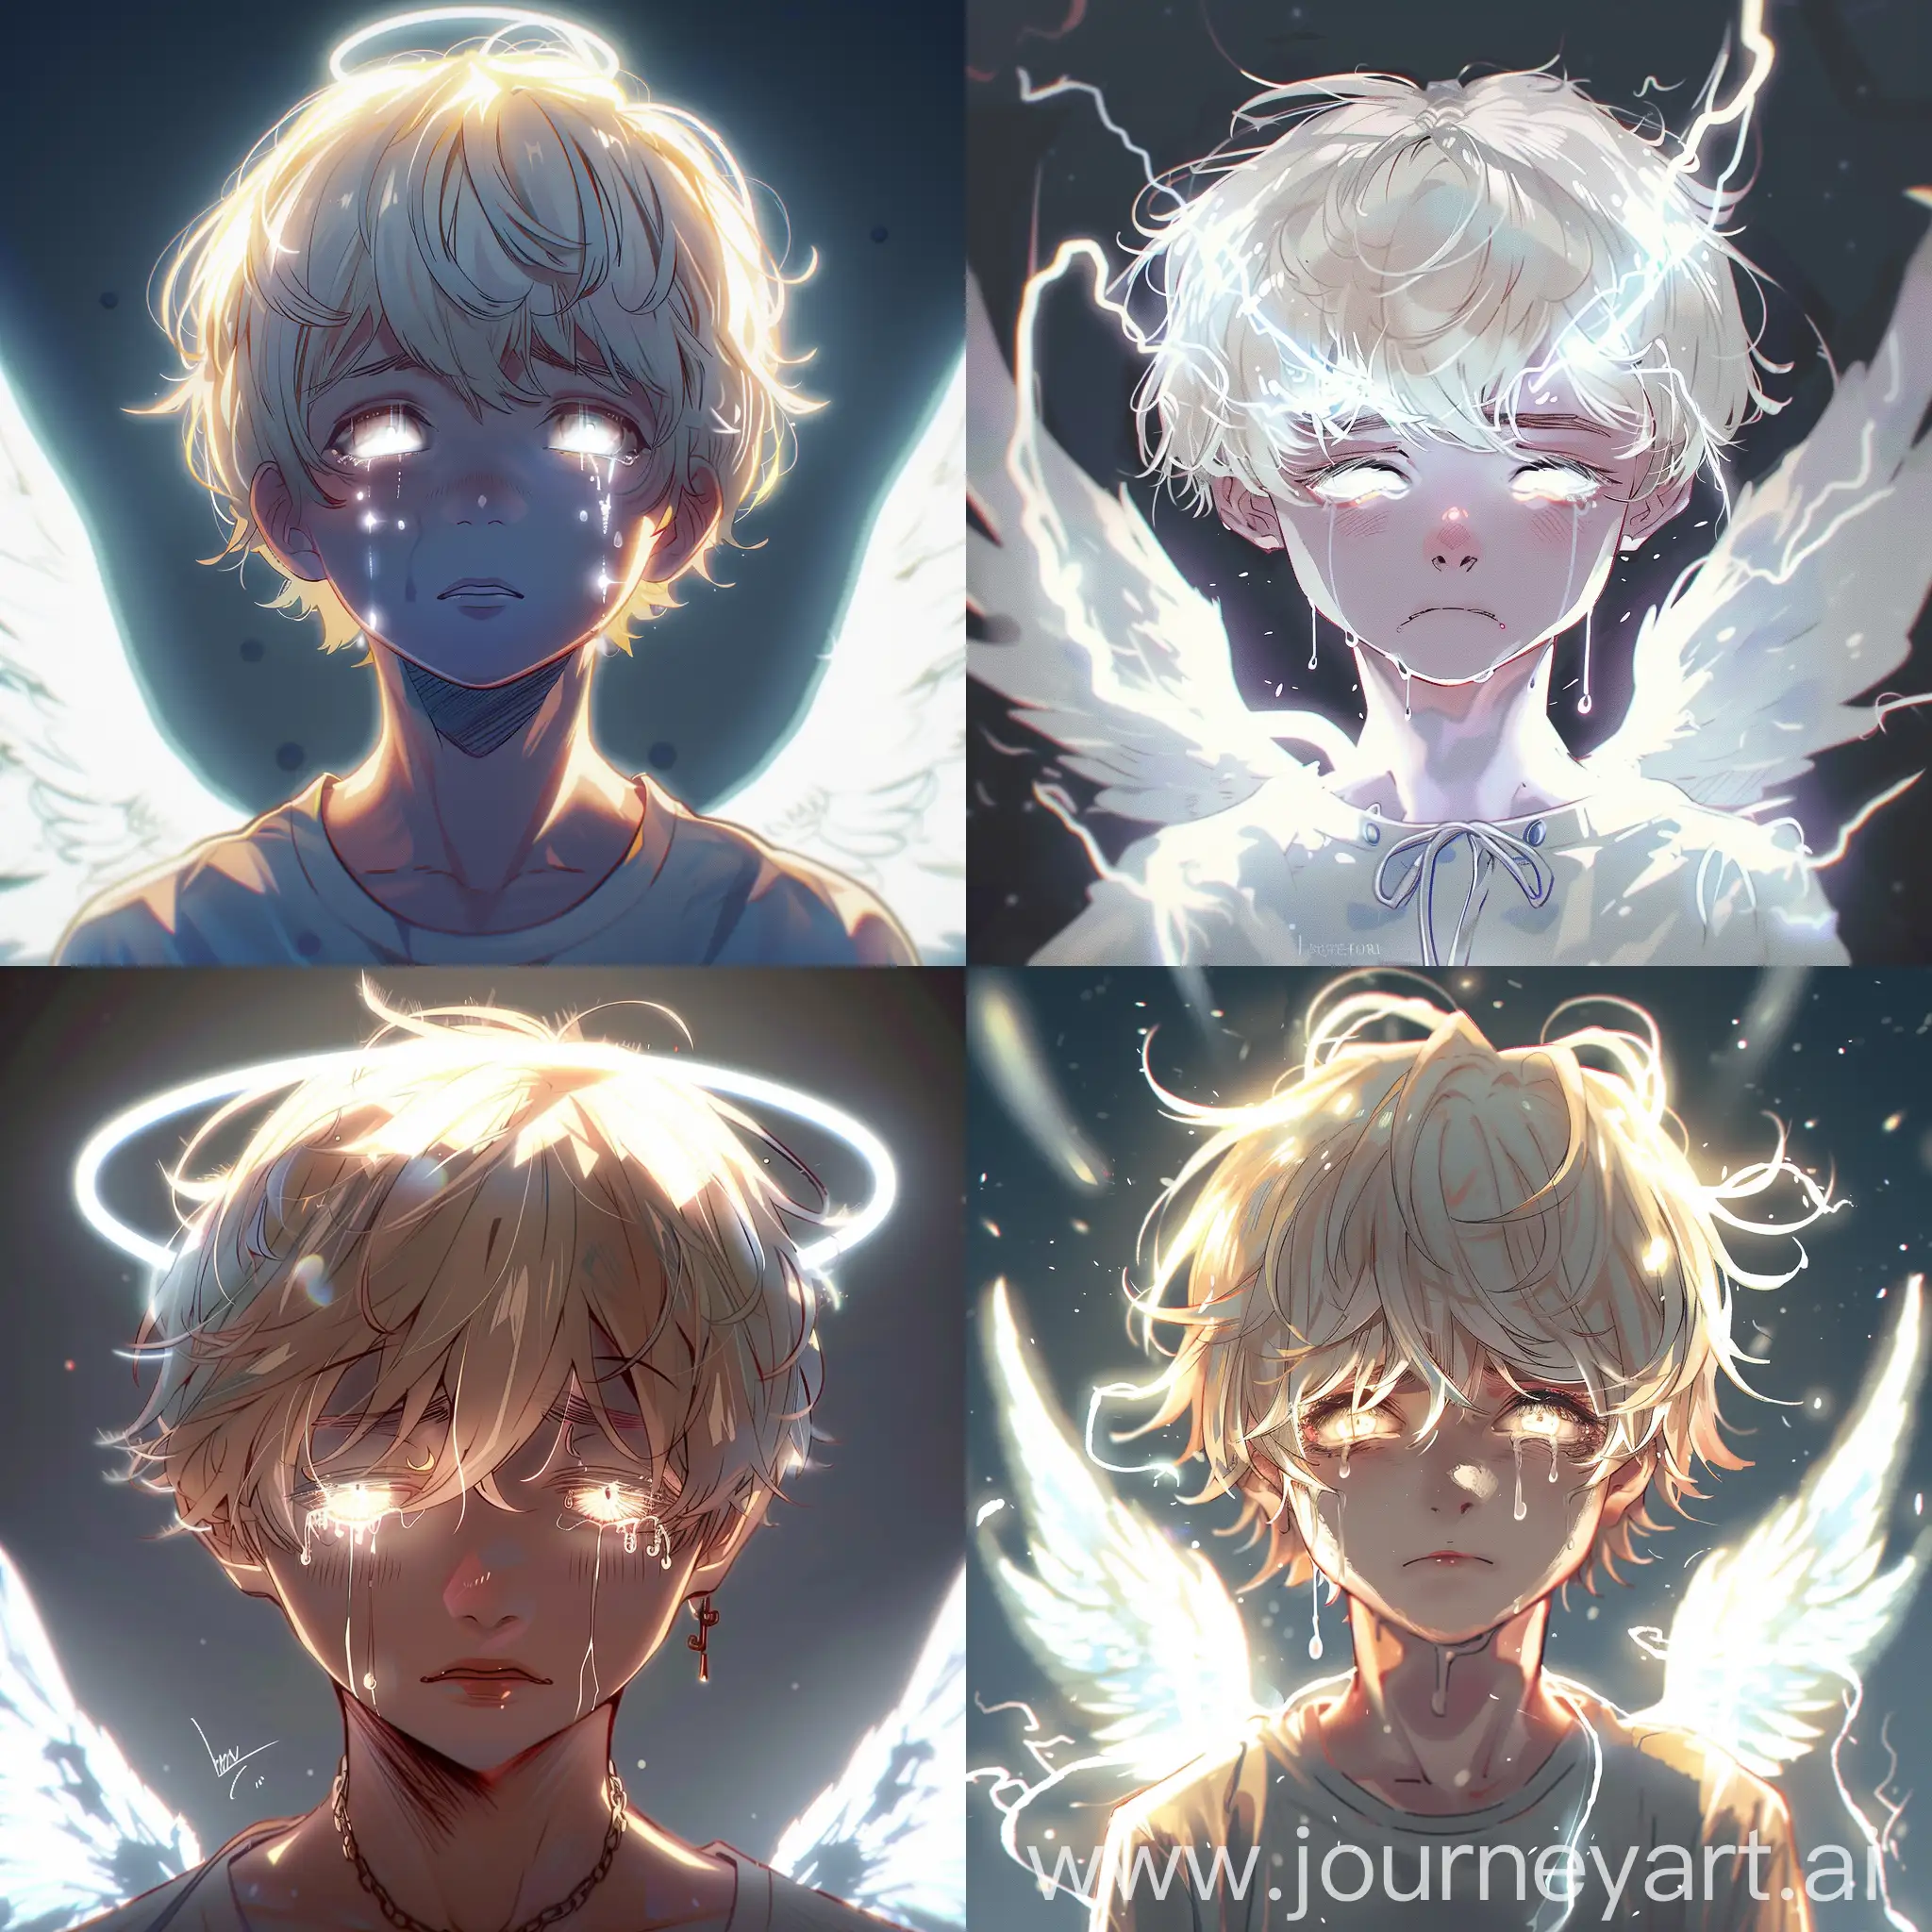 Glowing-Angelic-Anime-Boy-with-Bright-Blonde-Hair-and-Neon-Eyes-Crying